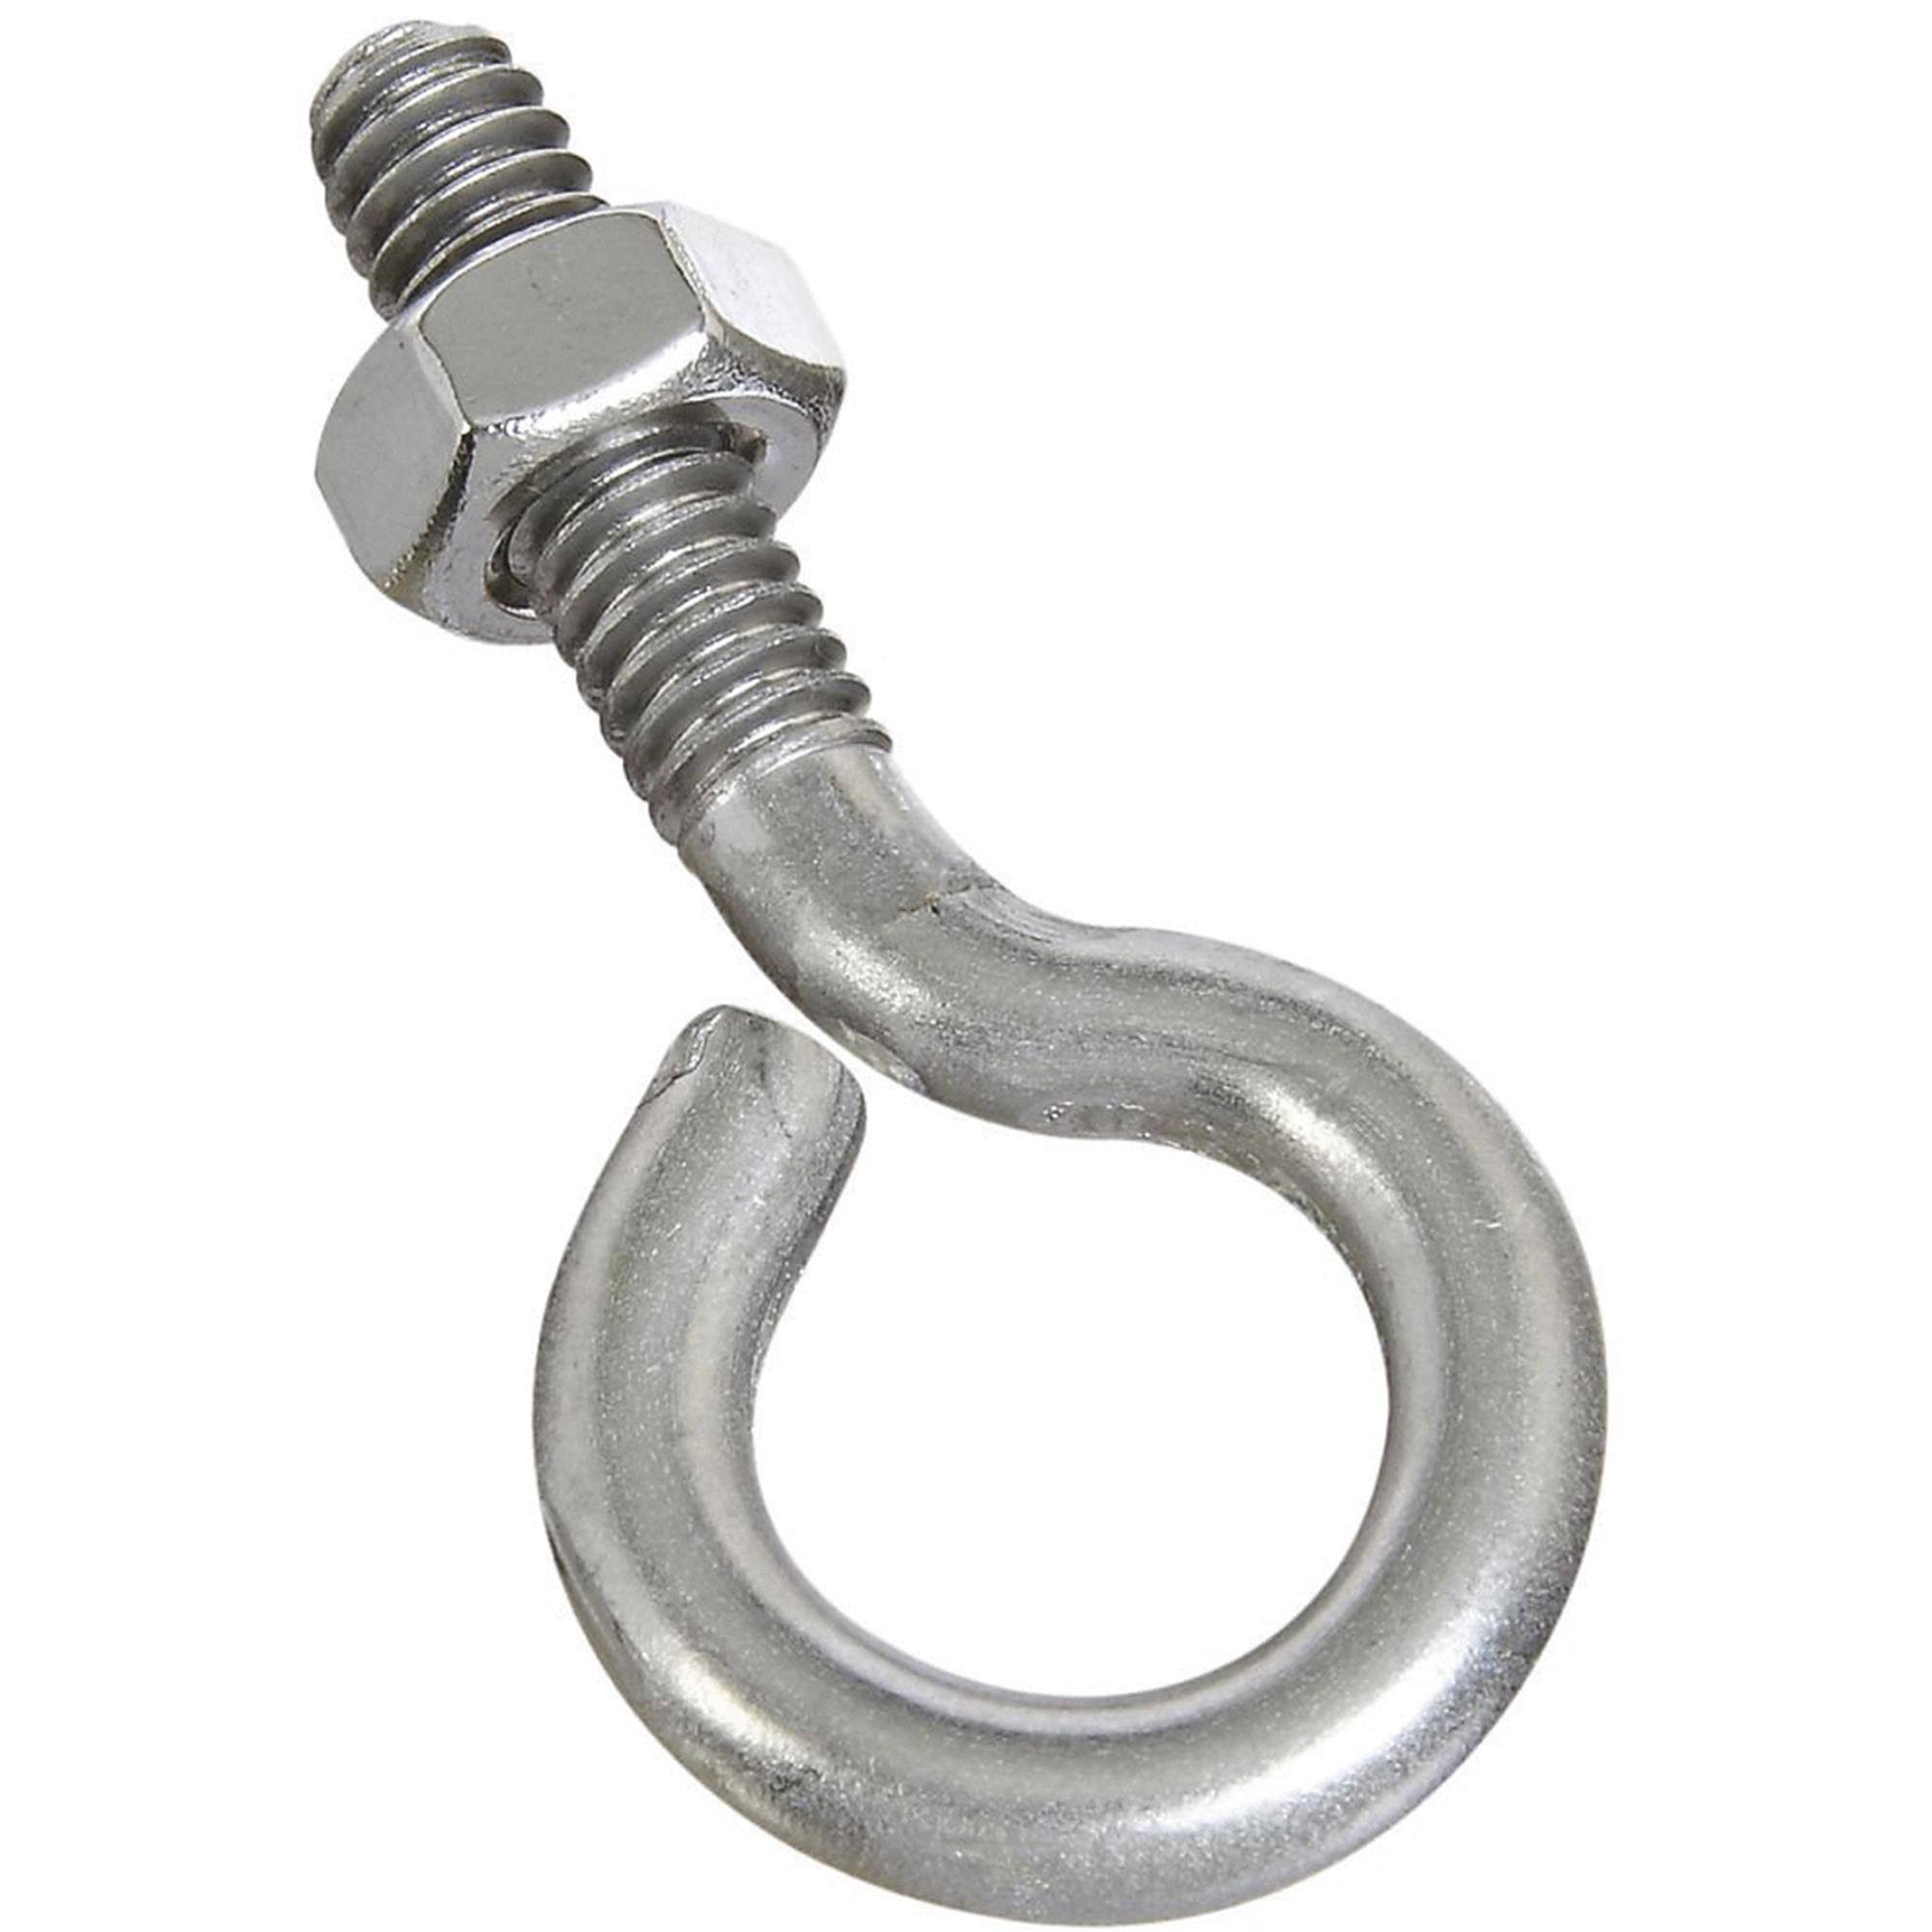 National Hardware 2161BC Eye Bolt with Hex Nut - Stainless Steel, 1/4" x 2"